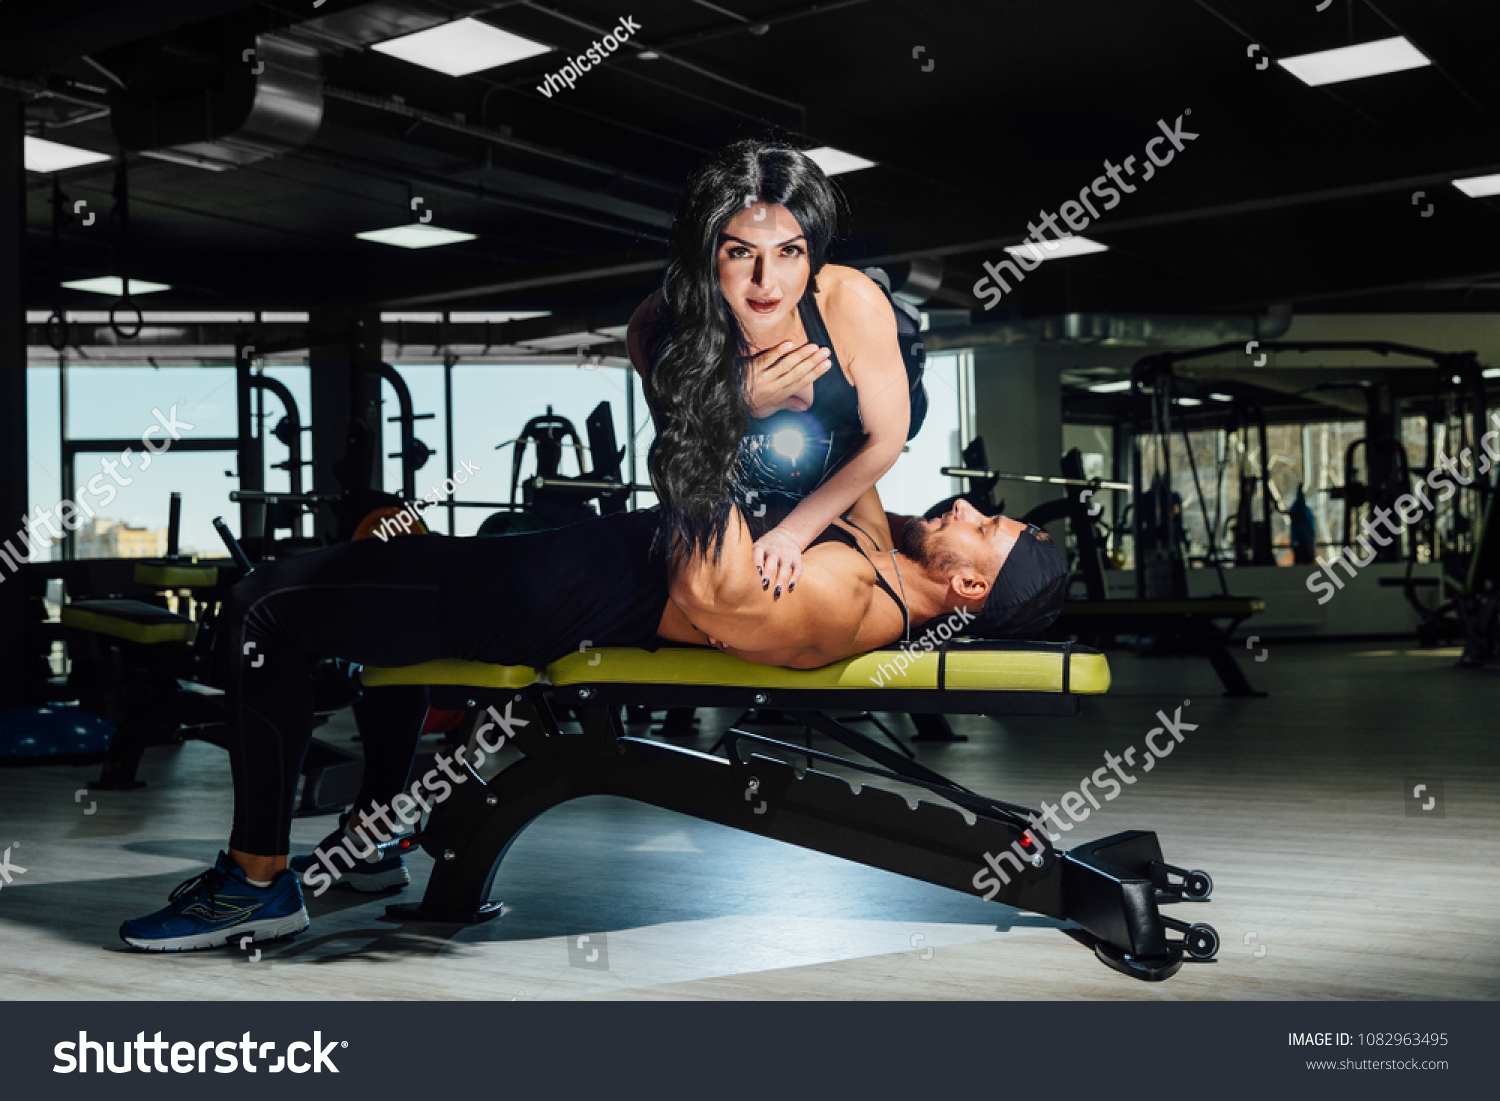 man doing barbell bench press and holds a girl instead of the bar in his arms. self-weight exercise at gym. copy space. beautiful fitness model amazing show training couple. guy has a bristle and cap. #1082963495